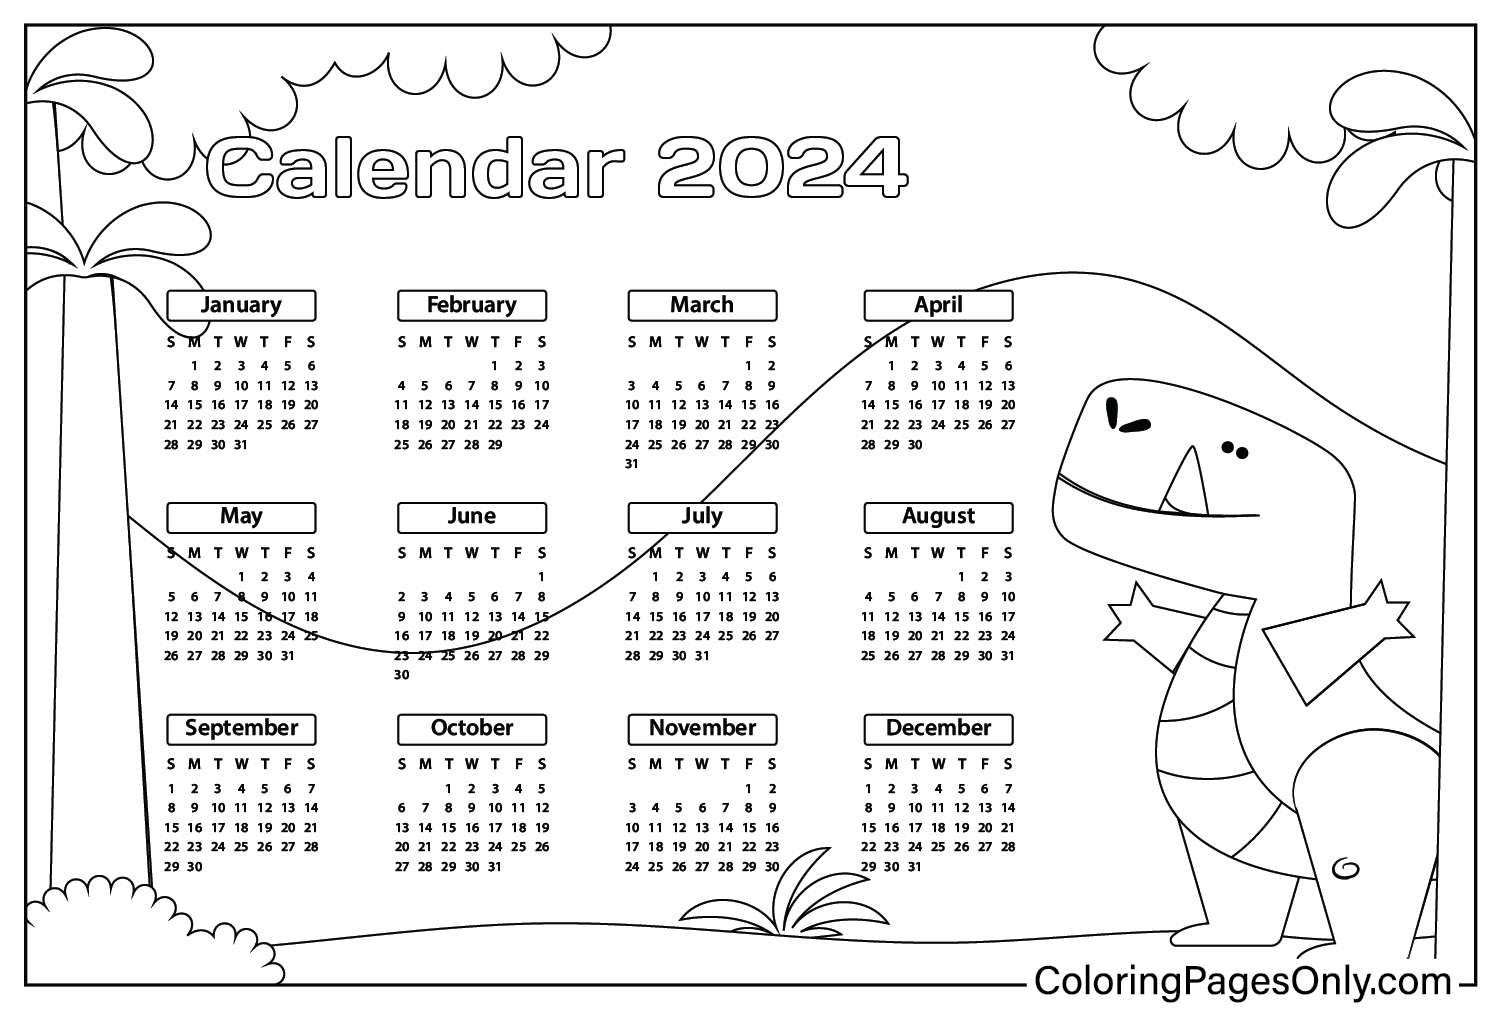 Calendar 2024 Coloring Pages to for Kids Free Printable Coloring Pages